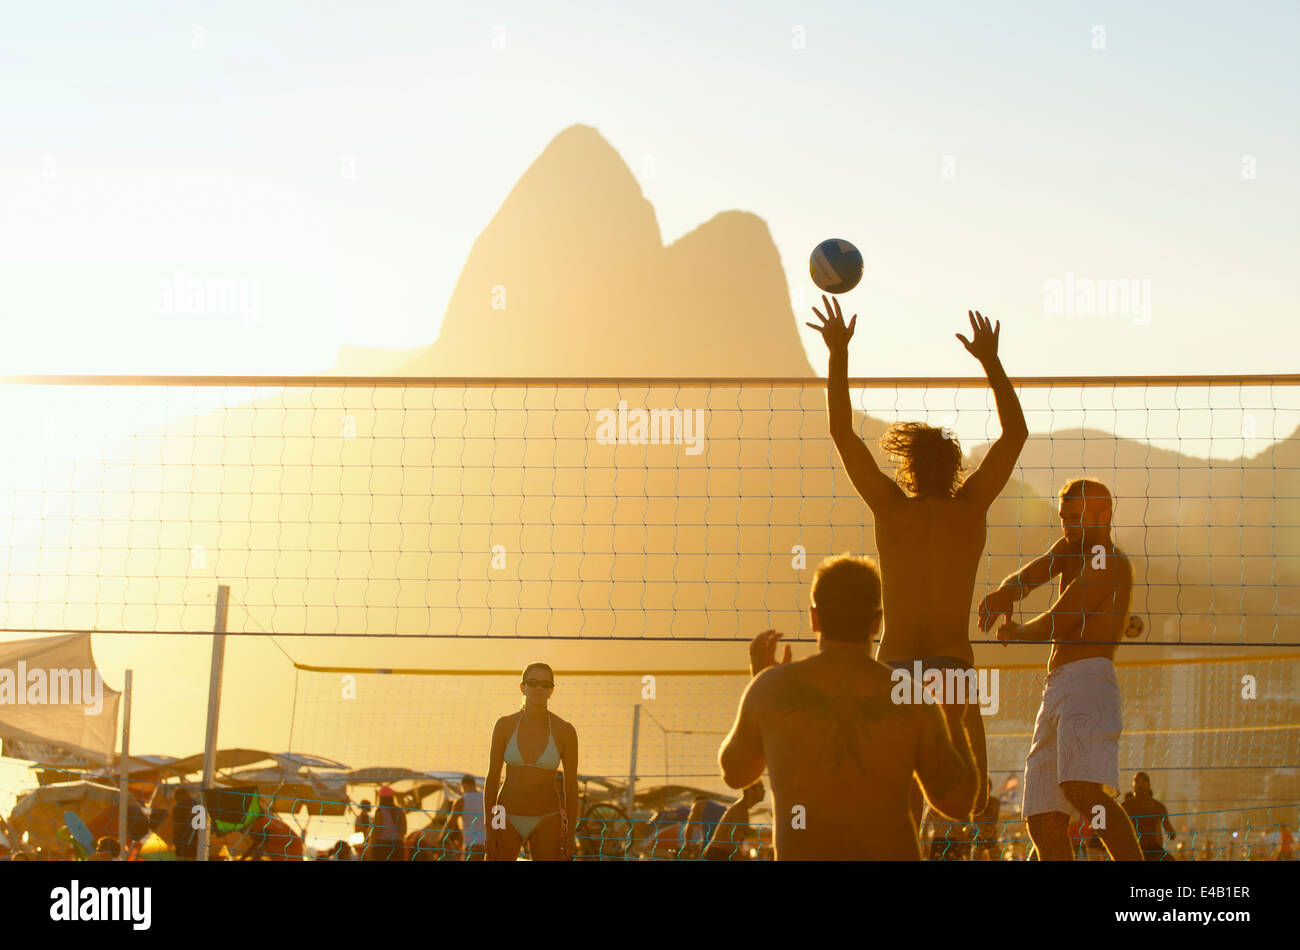 RIO DE JANEIRO, BRAZIL - FEBRUARY 01, 2014: Young carioca Brazilians play a game of beach volleyball against sunset silhouette Stock Photo